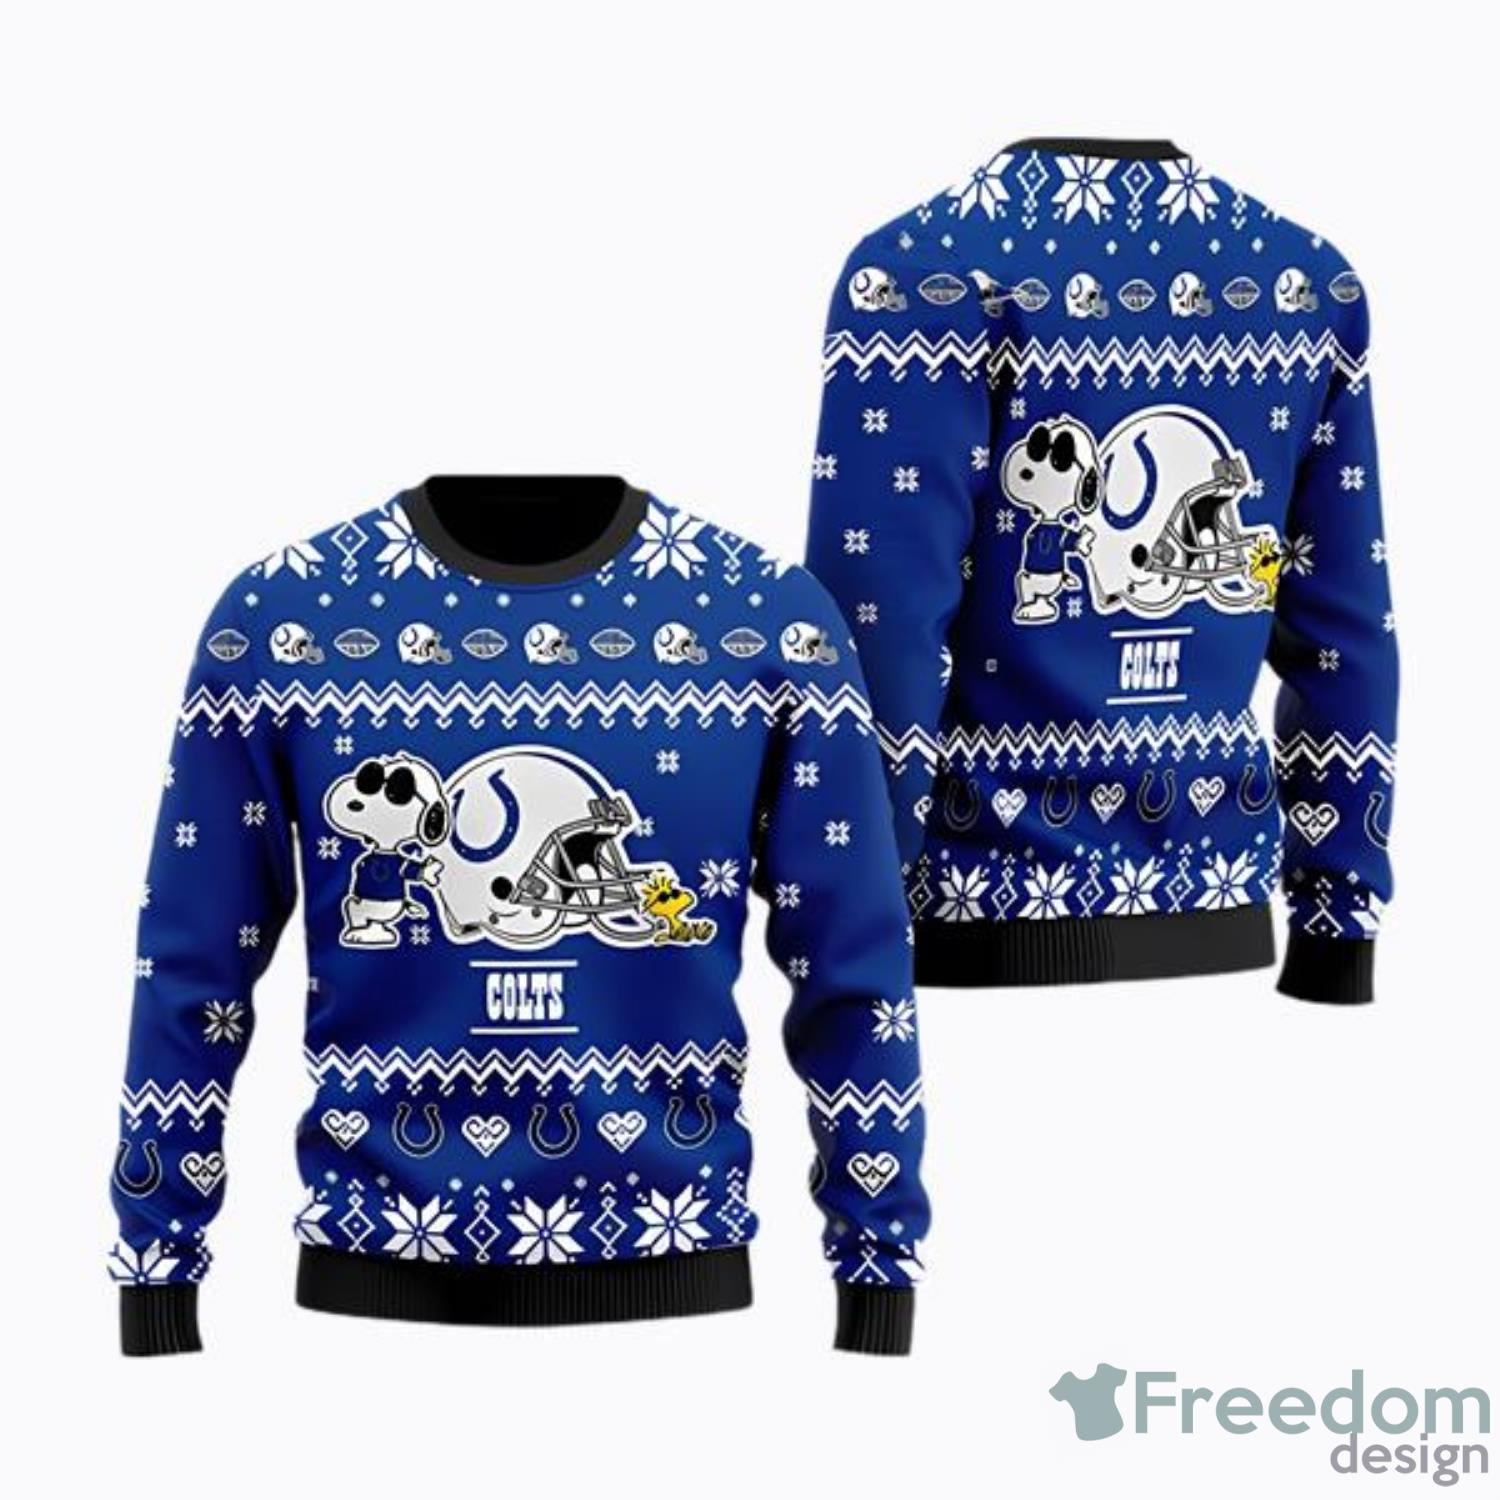 Indianapolis Colts Womens Christmas Sweater – Ugly Christmas Sweater Party